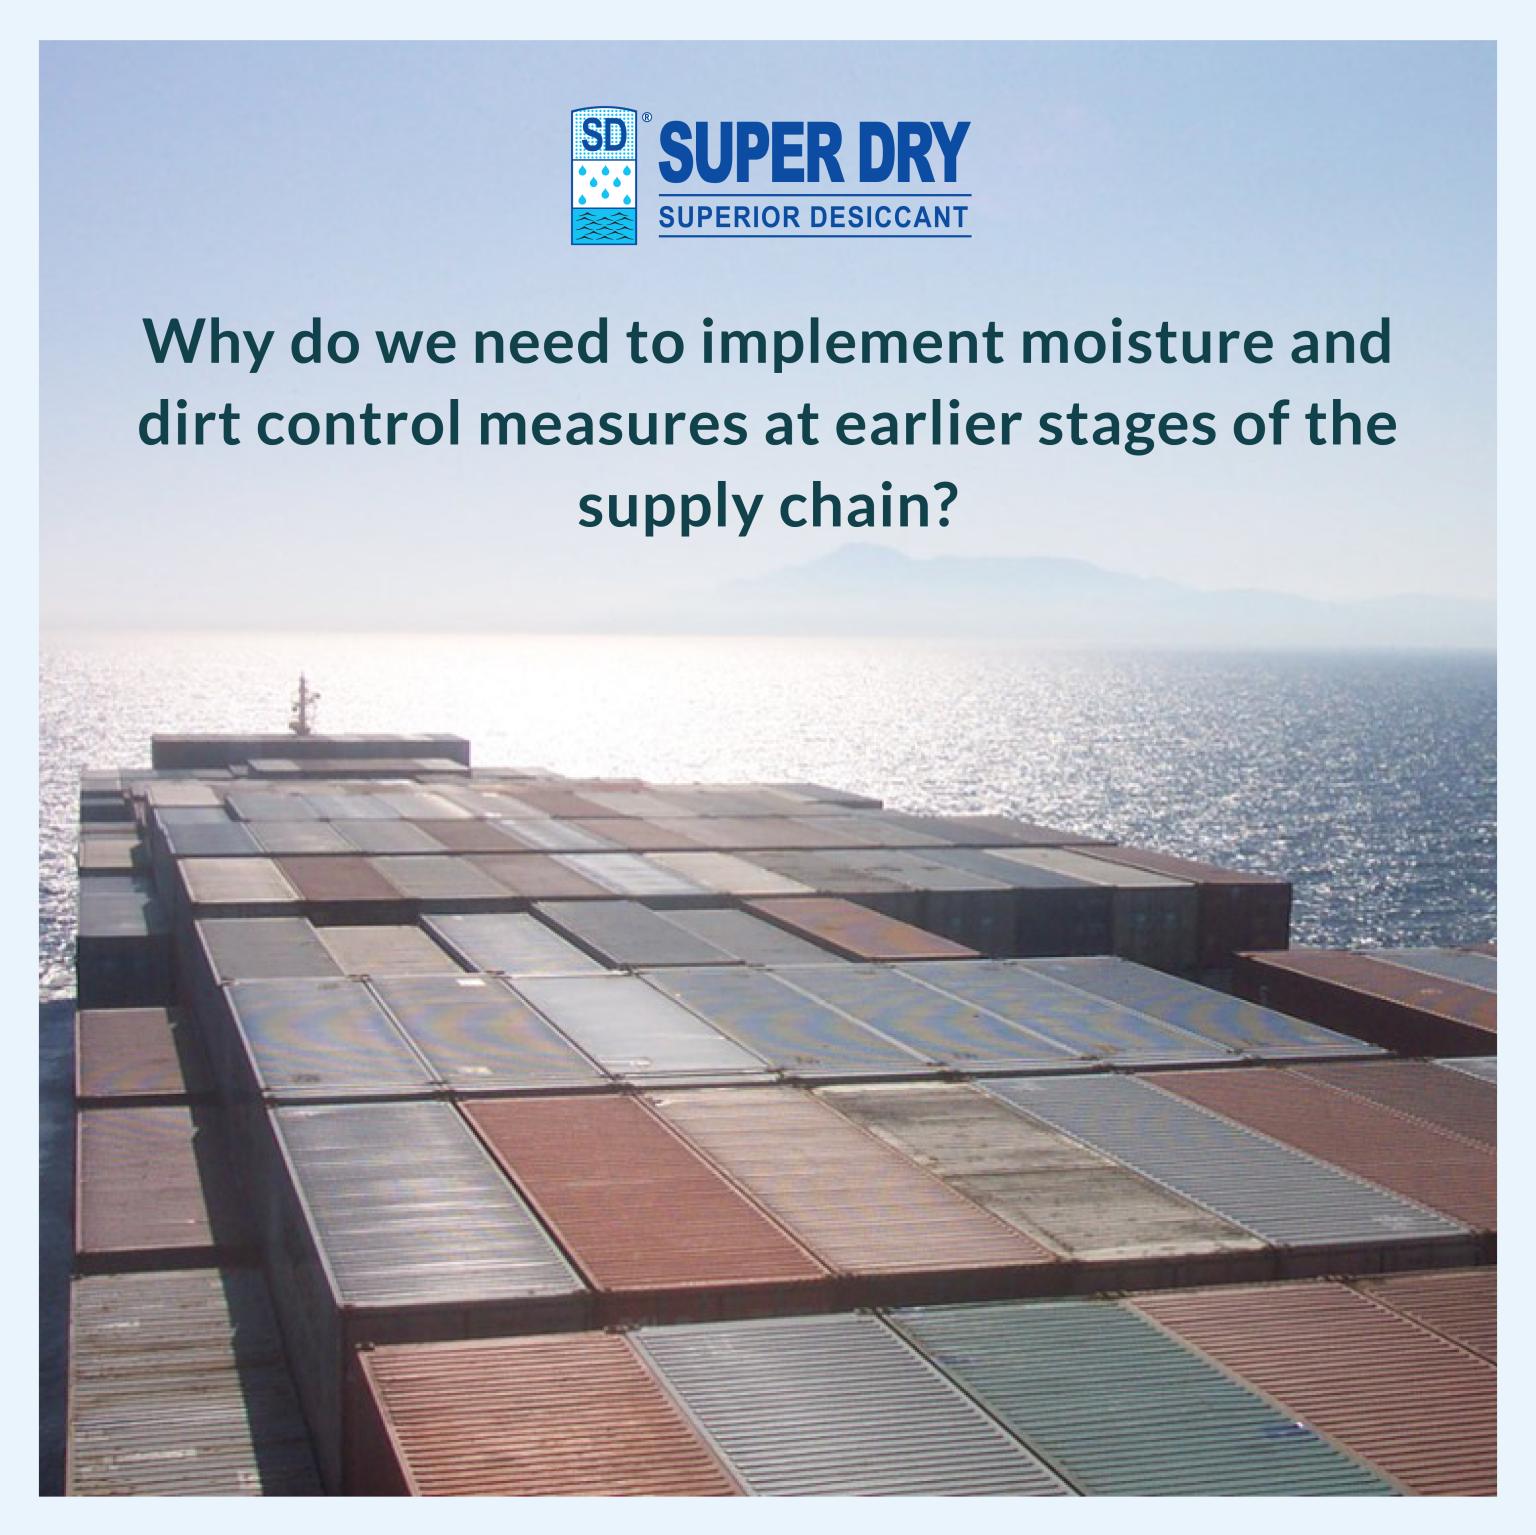 #Why do we need to implement moisture and dirt control measures at earlier stages of the supply chain?